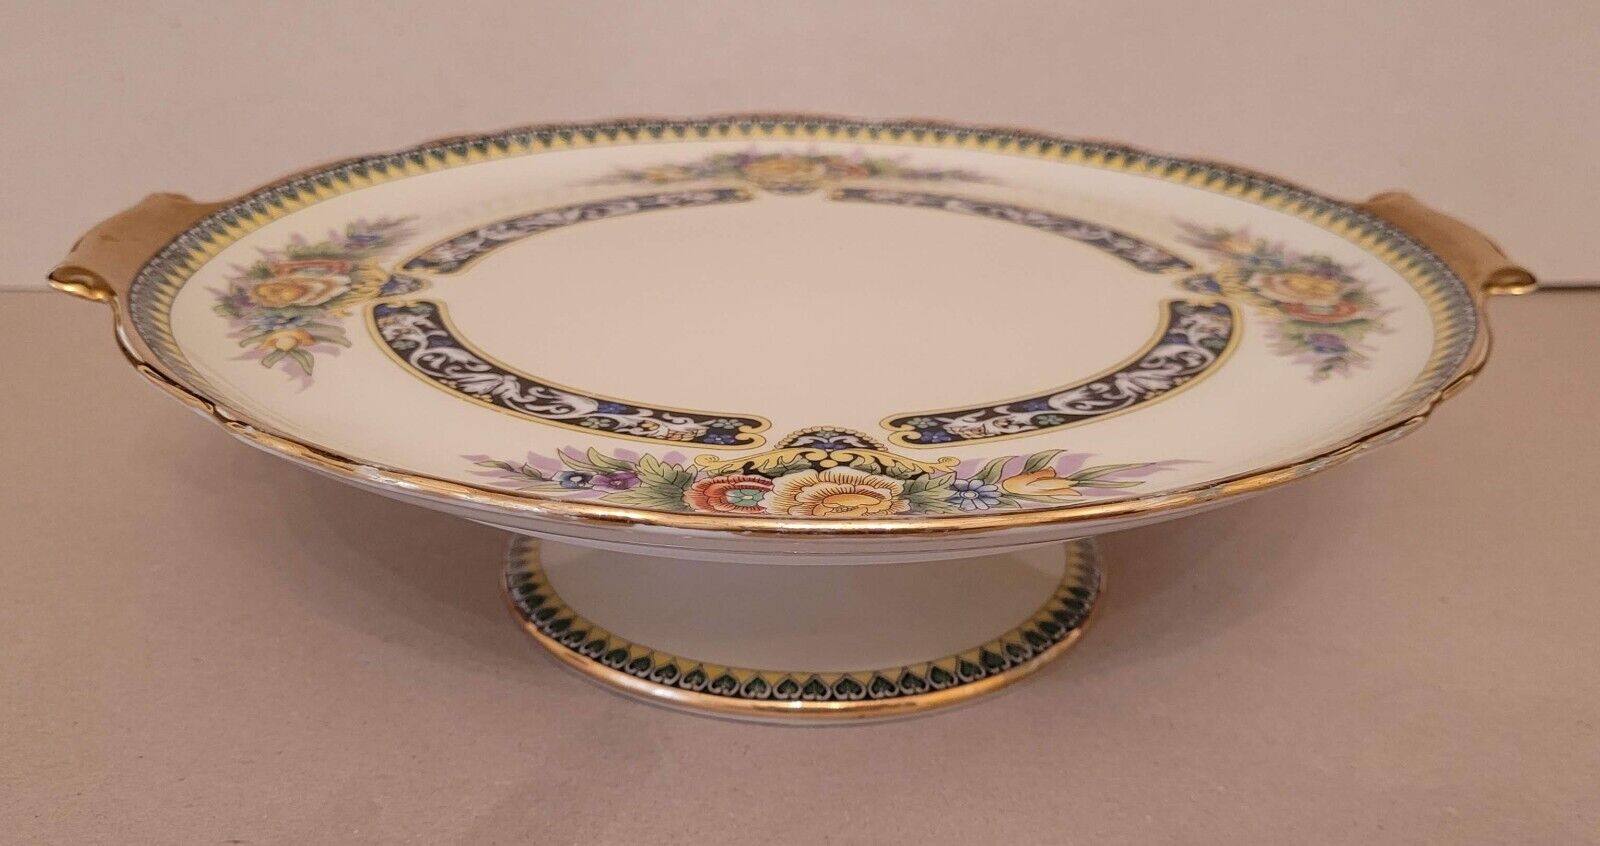 Pre-WWII Noritake cake stand, gold rimmed, antique, very good